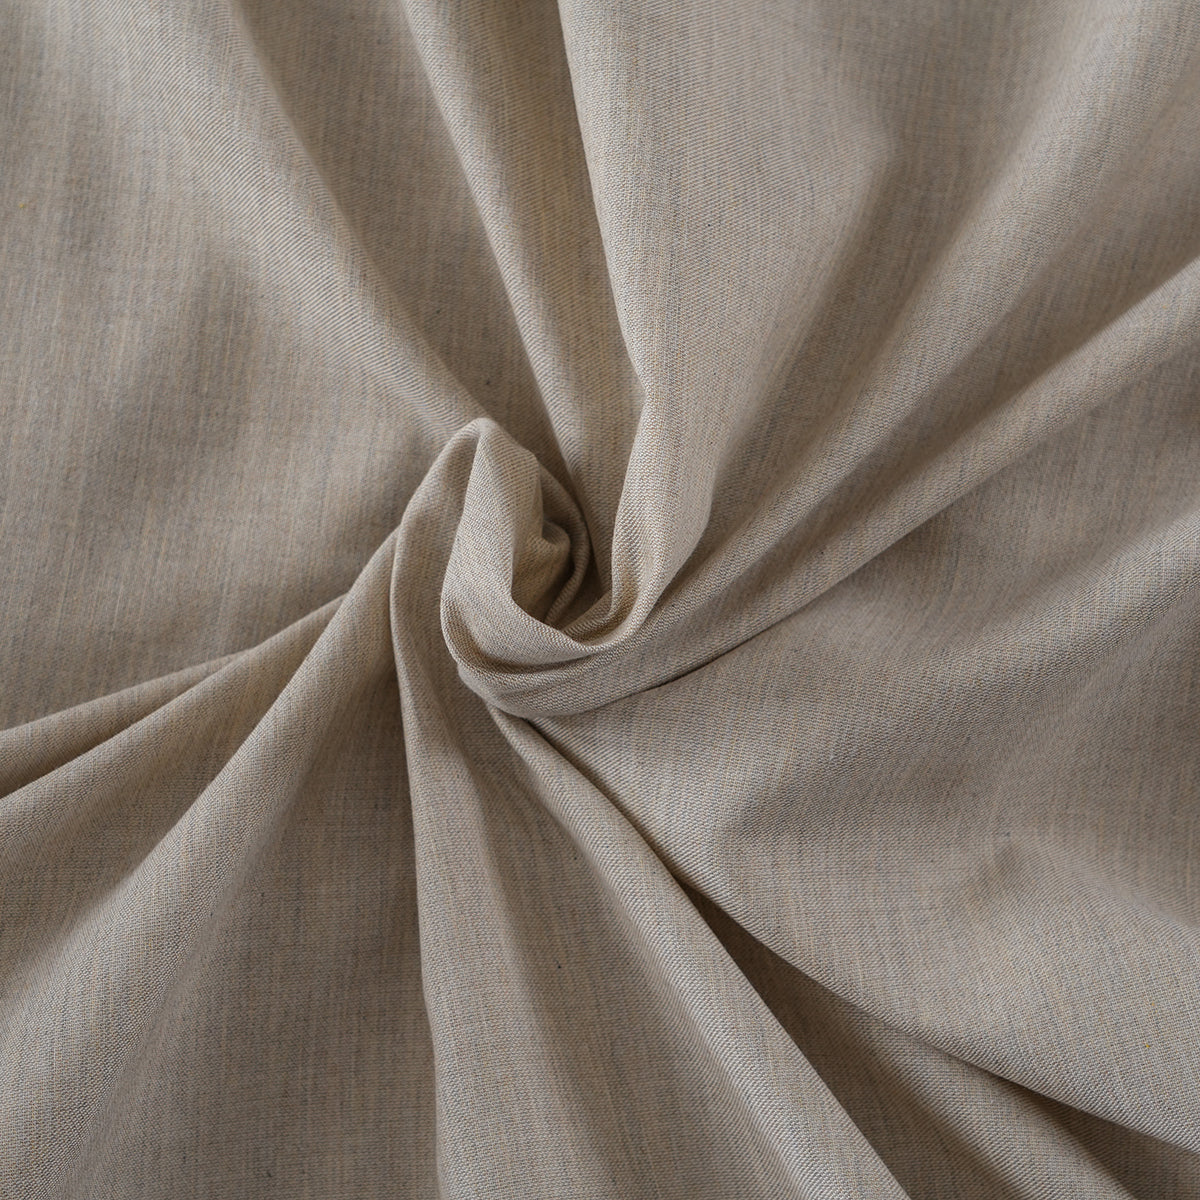 Emmie Made With Egyptian Cotton Ultra Soft Light Beige Bed Sheet